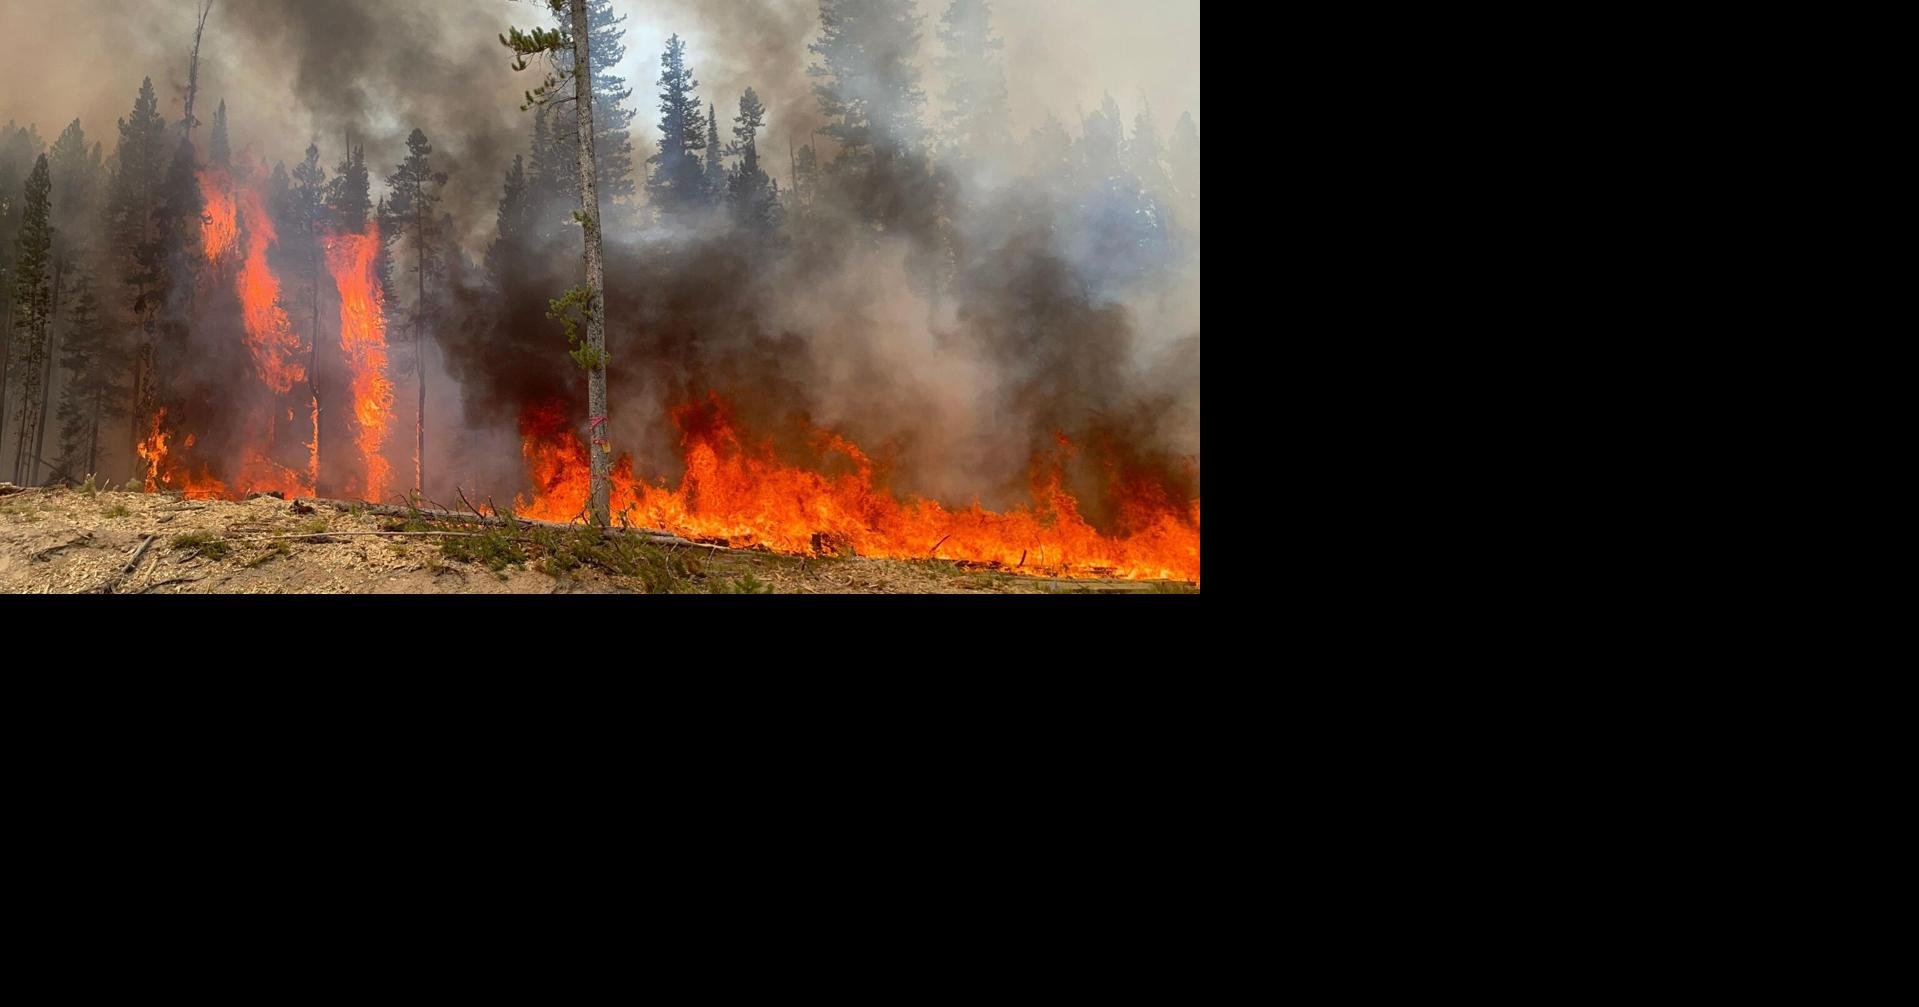 Still Burning After 7 Weeks, Idaho’s Largest Active Wildfire Reaches Over 105,000 Acres